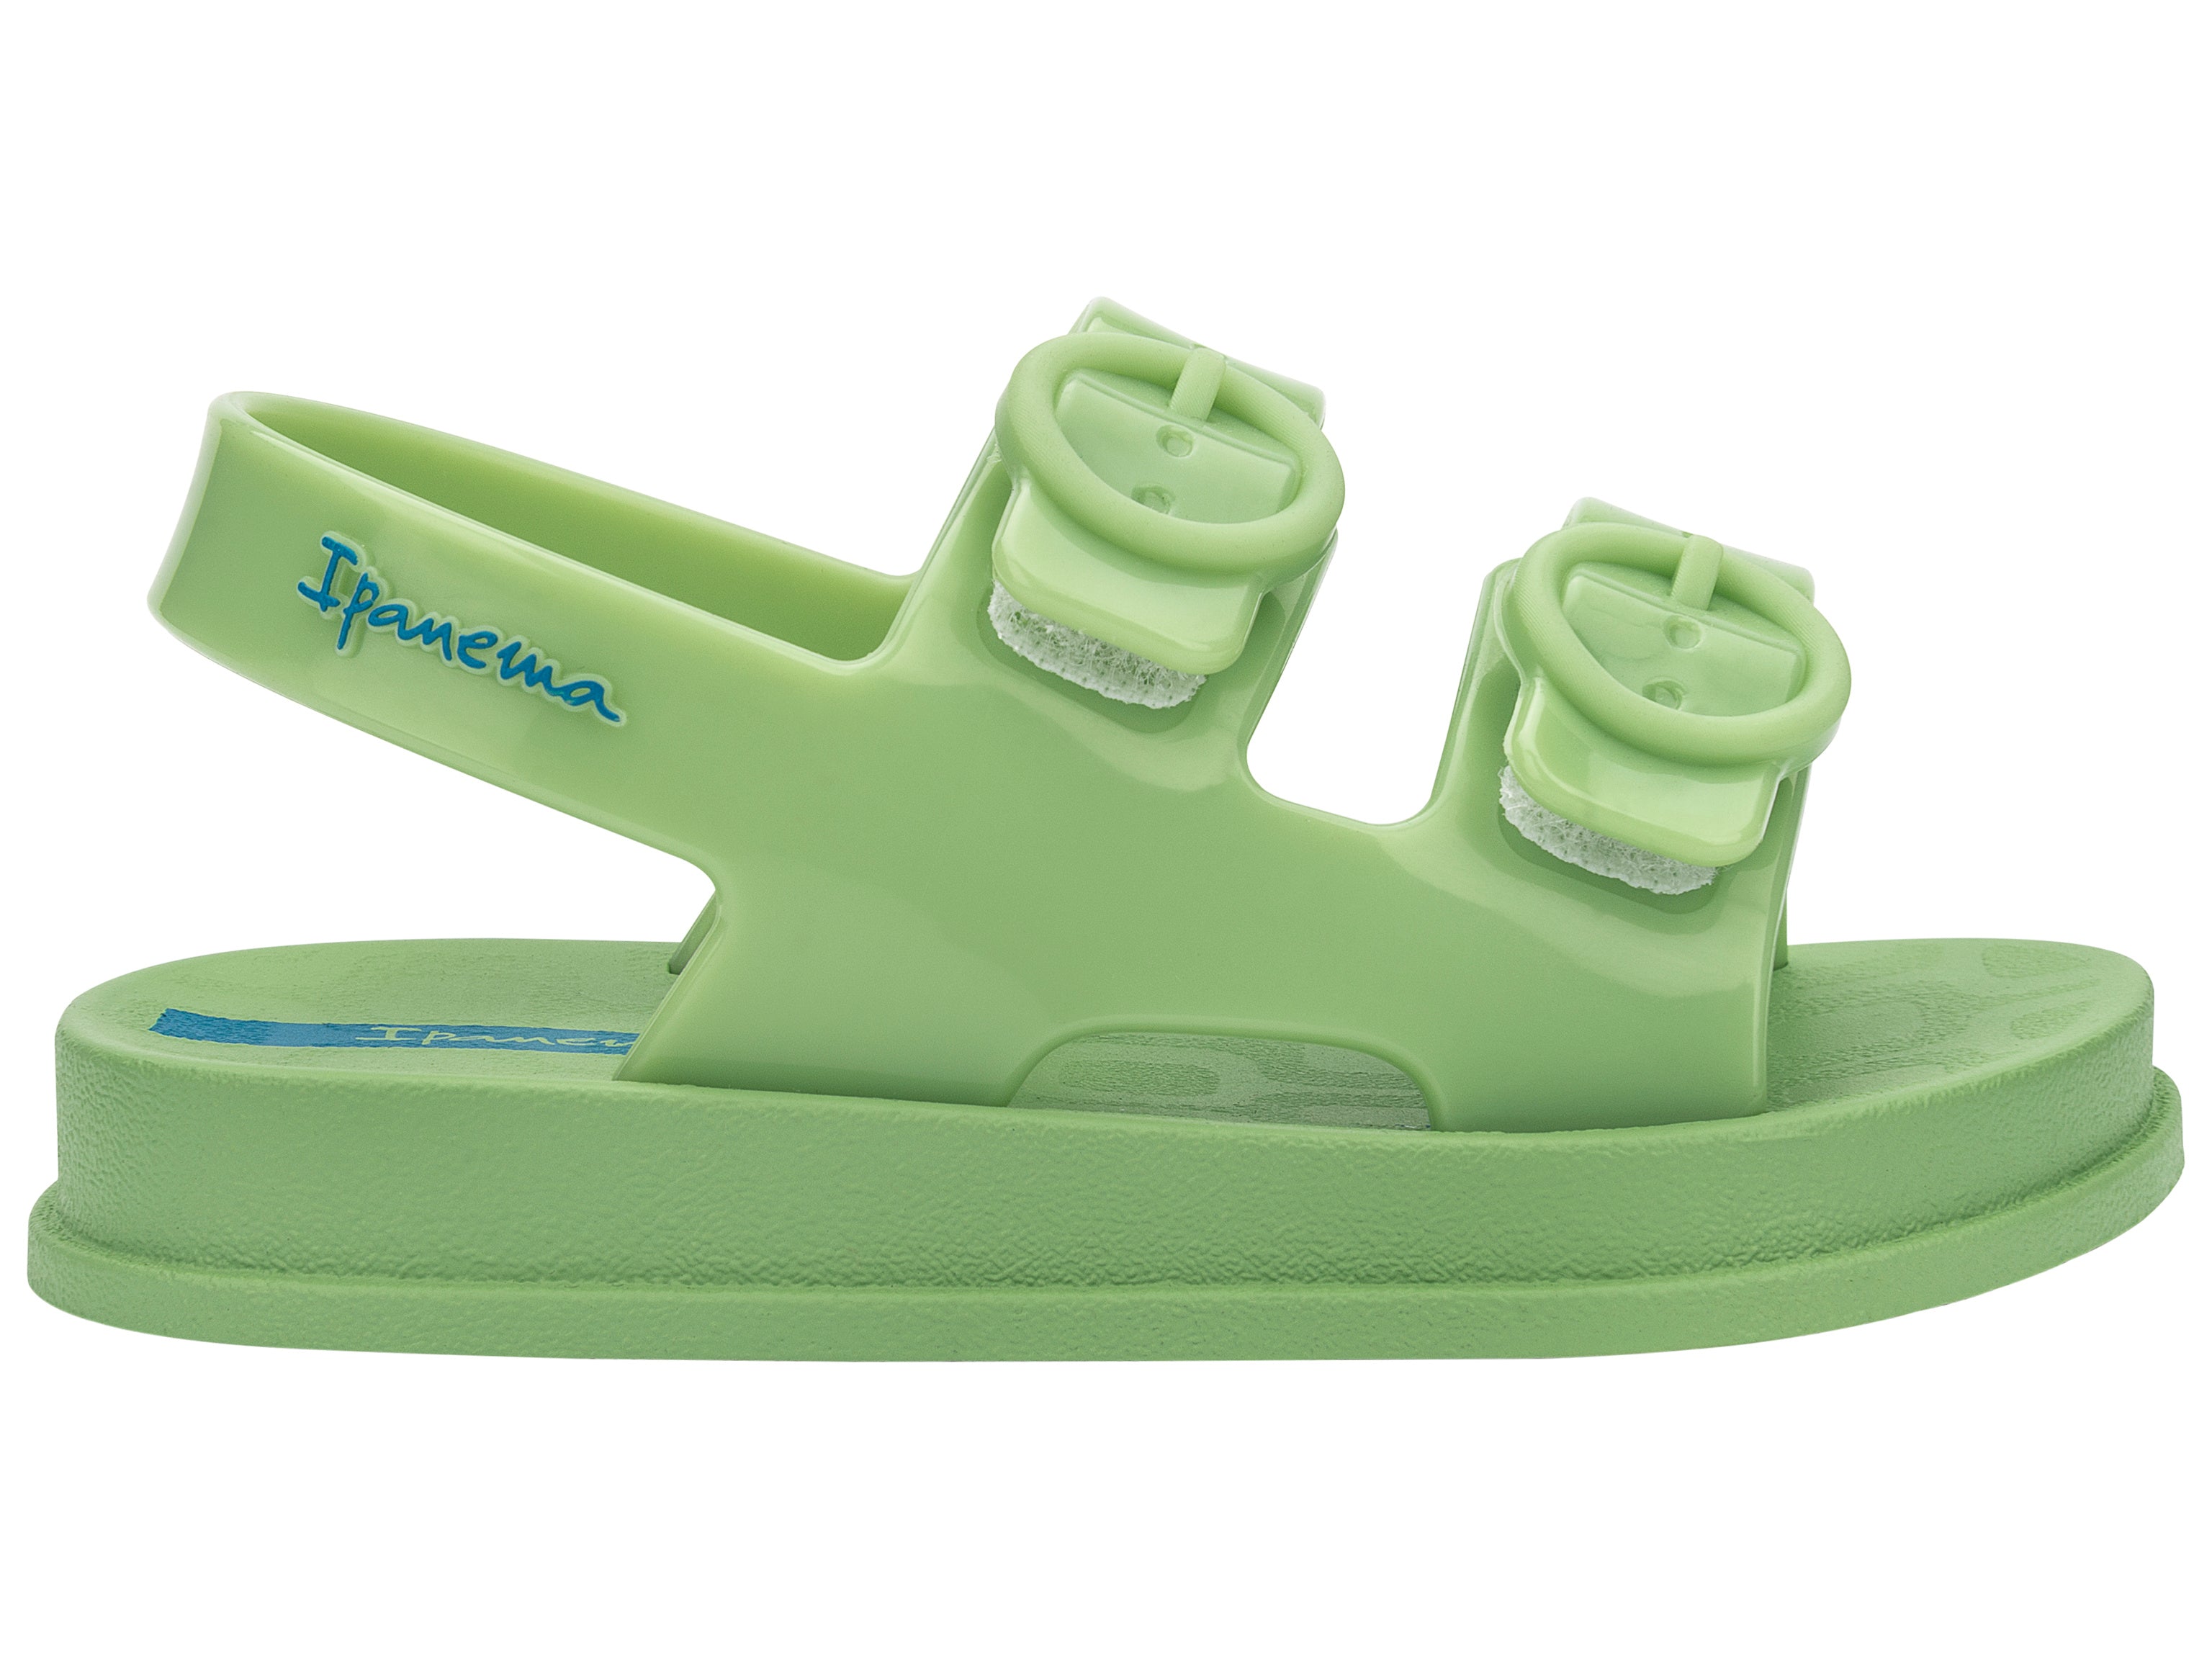 Outer side view of a green Ipanema Follow baby sandal with two decorative buckles on the upper.